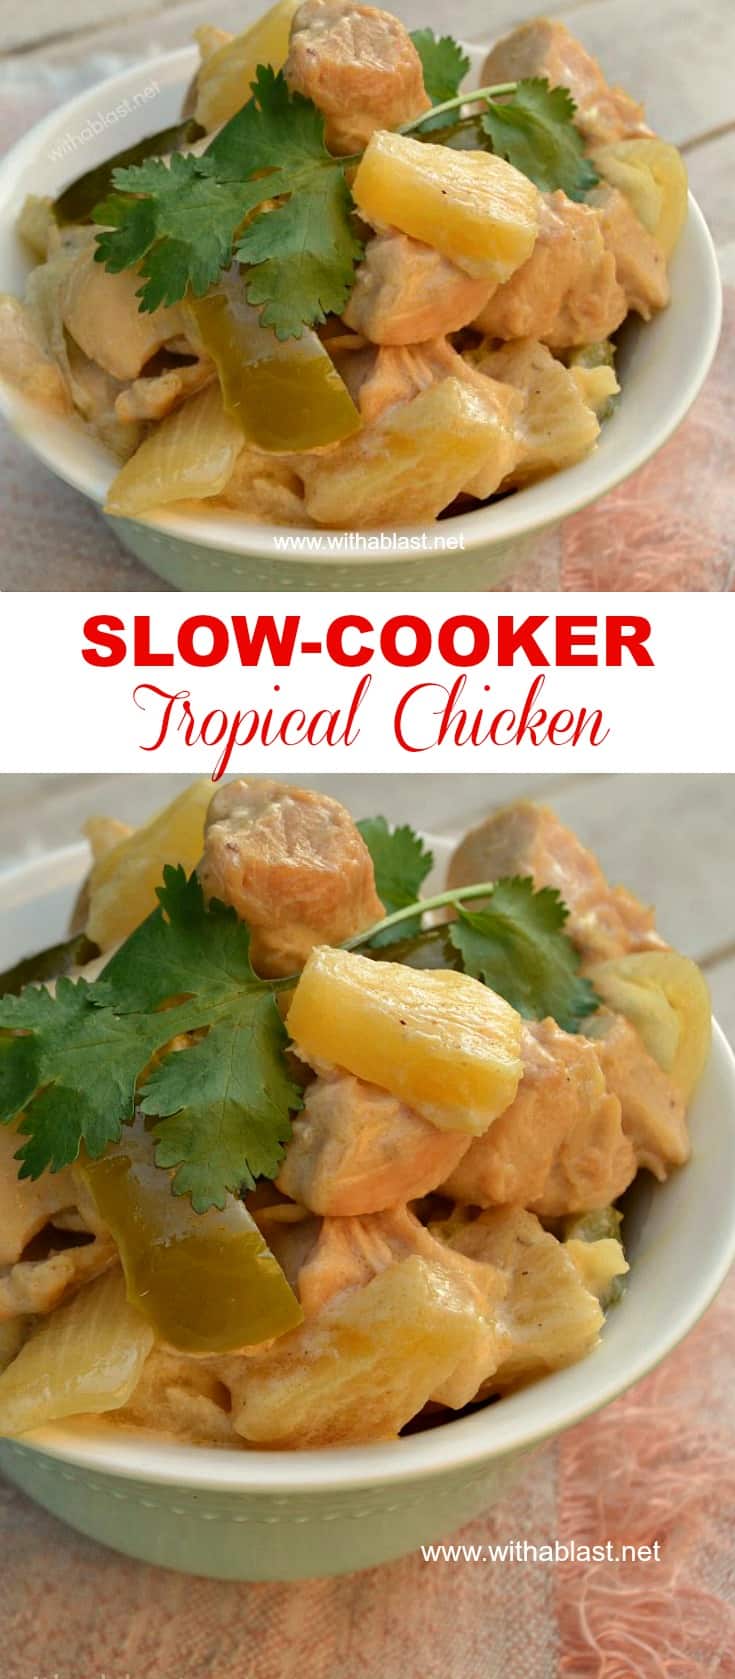 Slow-Cooker Tropical Chicken is a no-fuss, delicious recipe which brings the Island flavors straight to your dinner table - perfect week night meal #SlowCookerChicken #CrockpotChicken #TropicalChicken #PineappleChicken